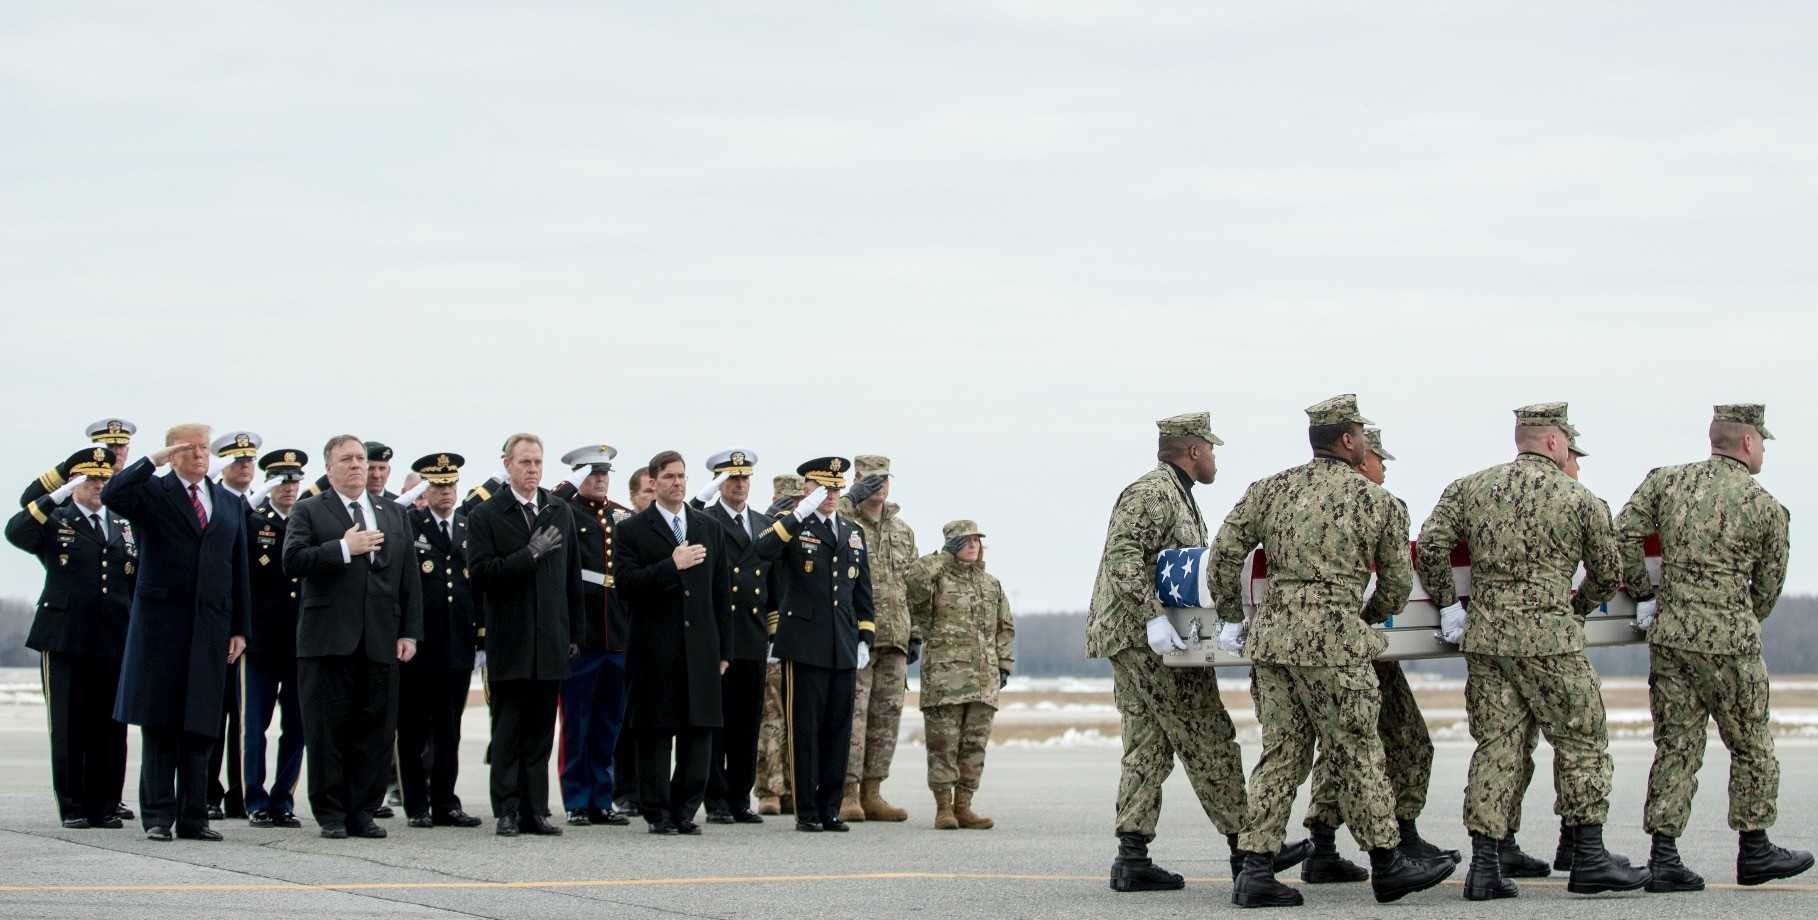 The U.S. president and high-level officials salute as a U.S. Navy team transfers the body of Scott A. Wirtz, who was killed in a suicide attack claimed by Daesh in Manbij, Syria on Jan. 16.